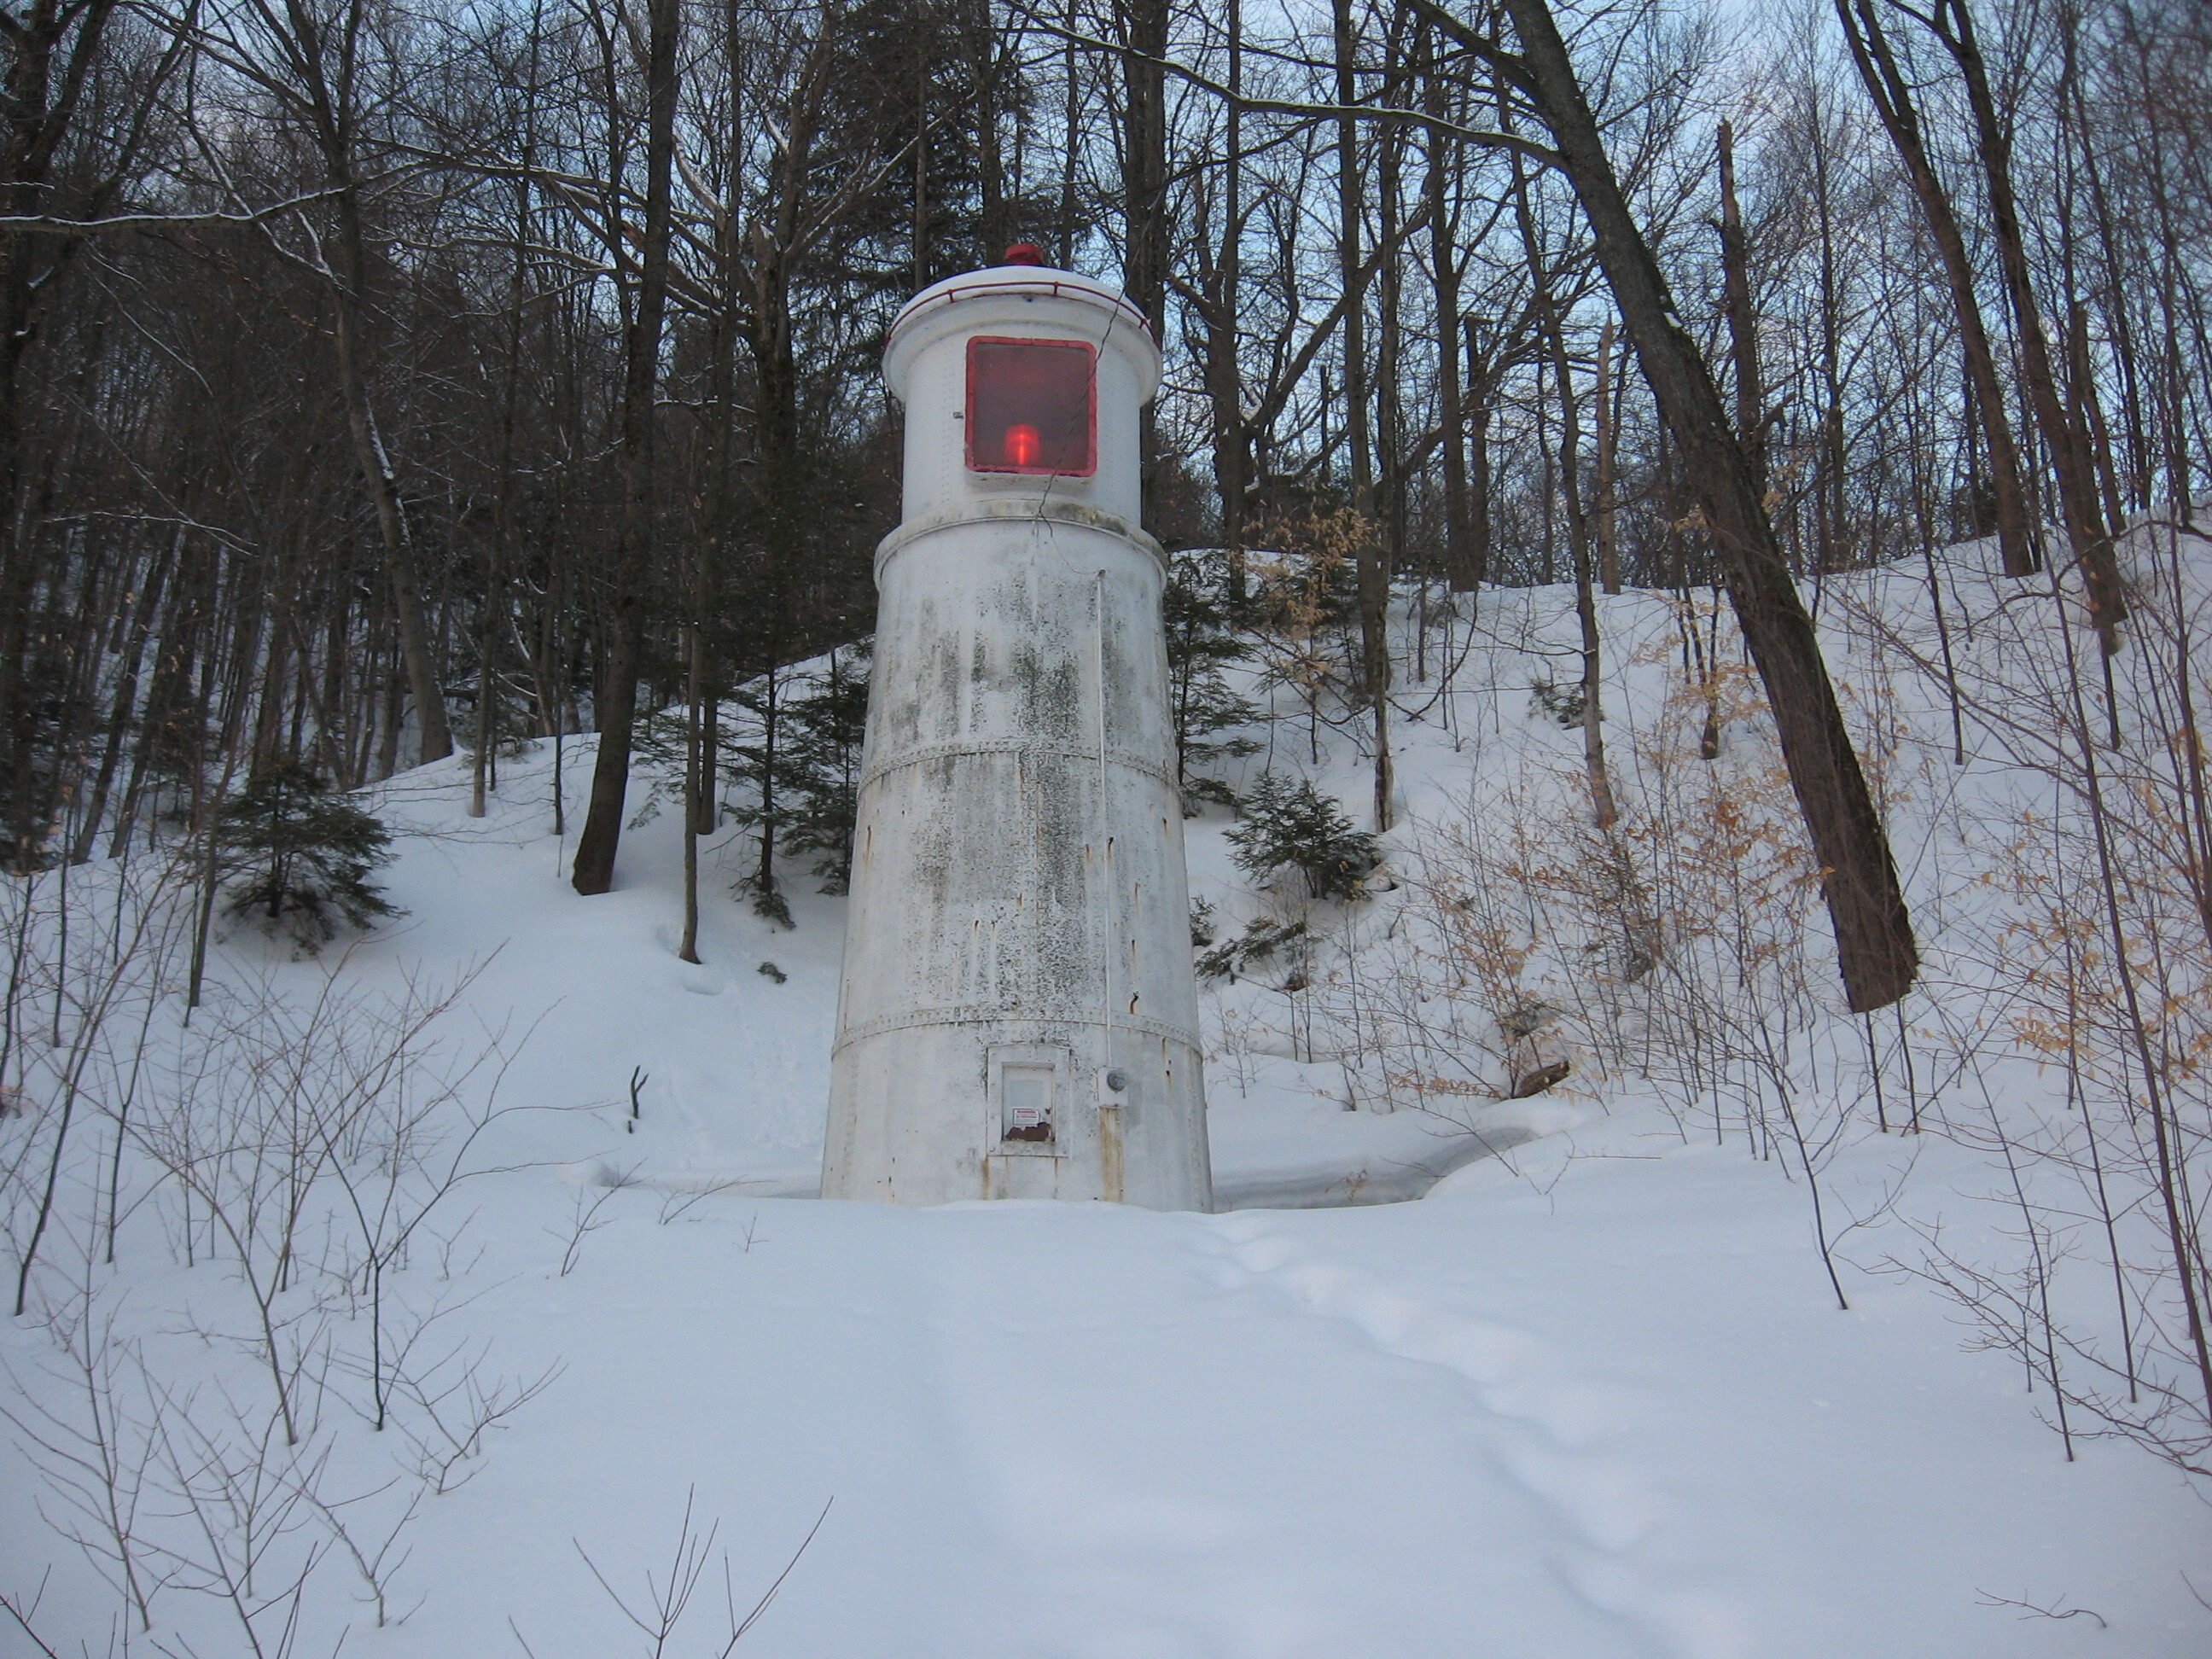 Small lighthouse in the snowy woods.